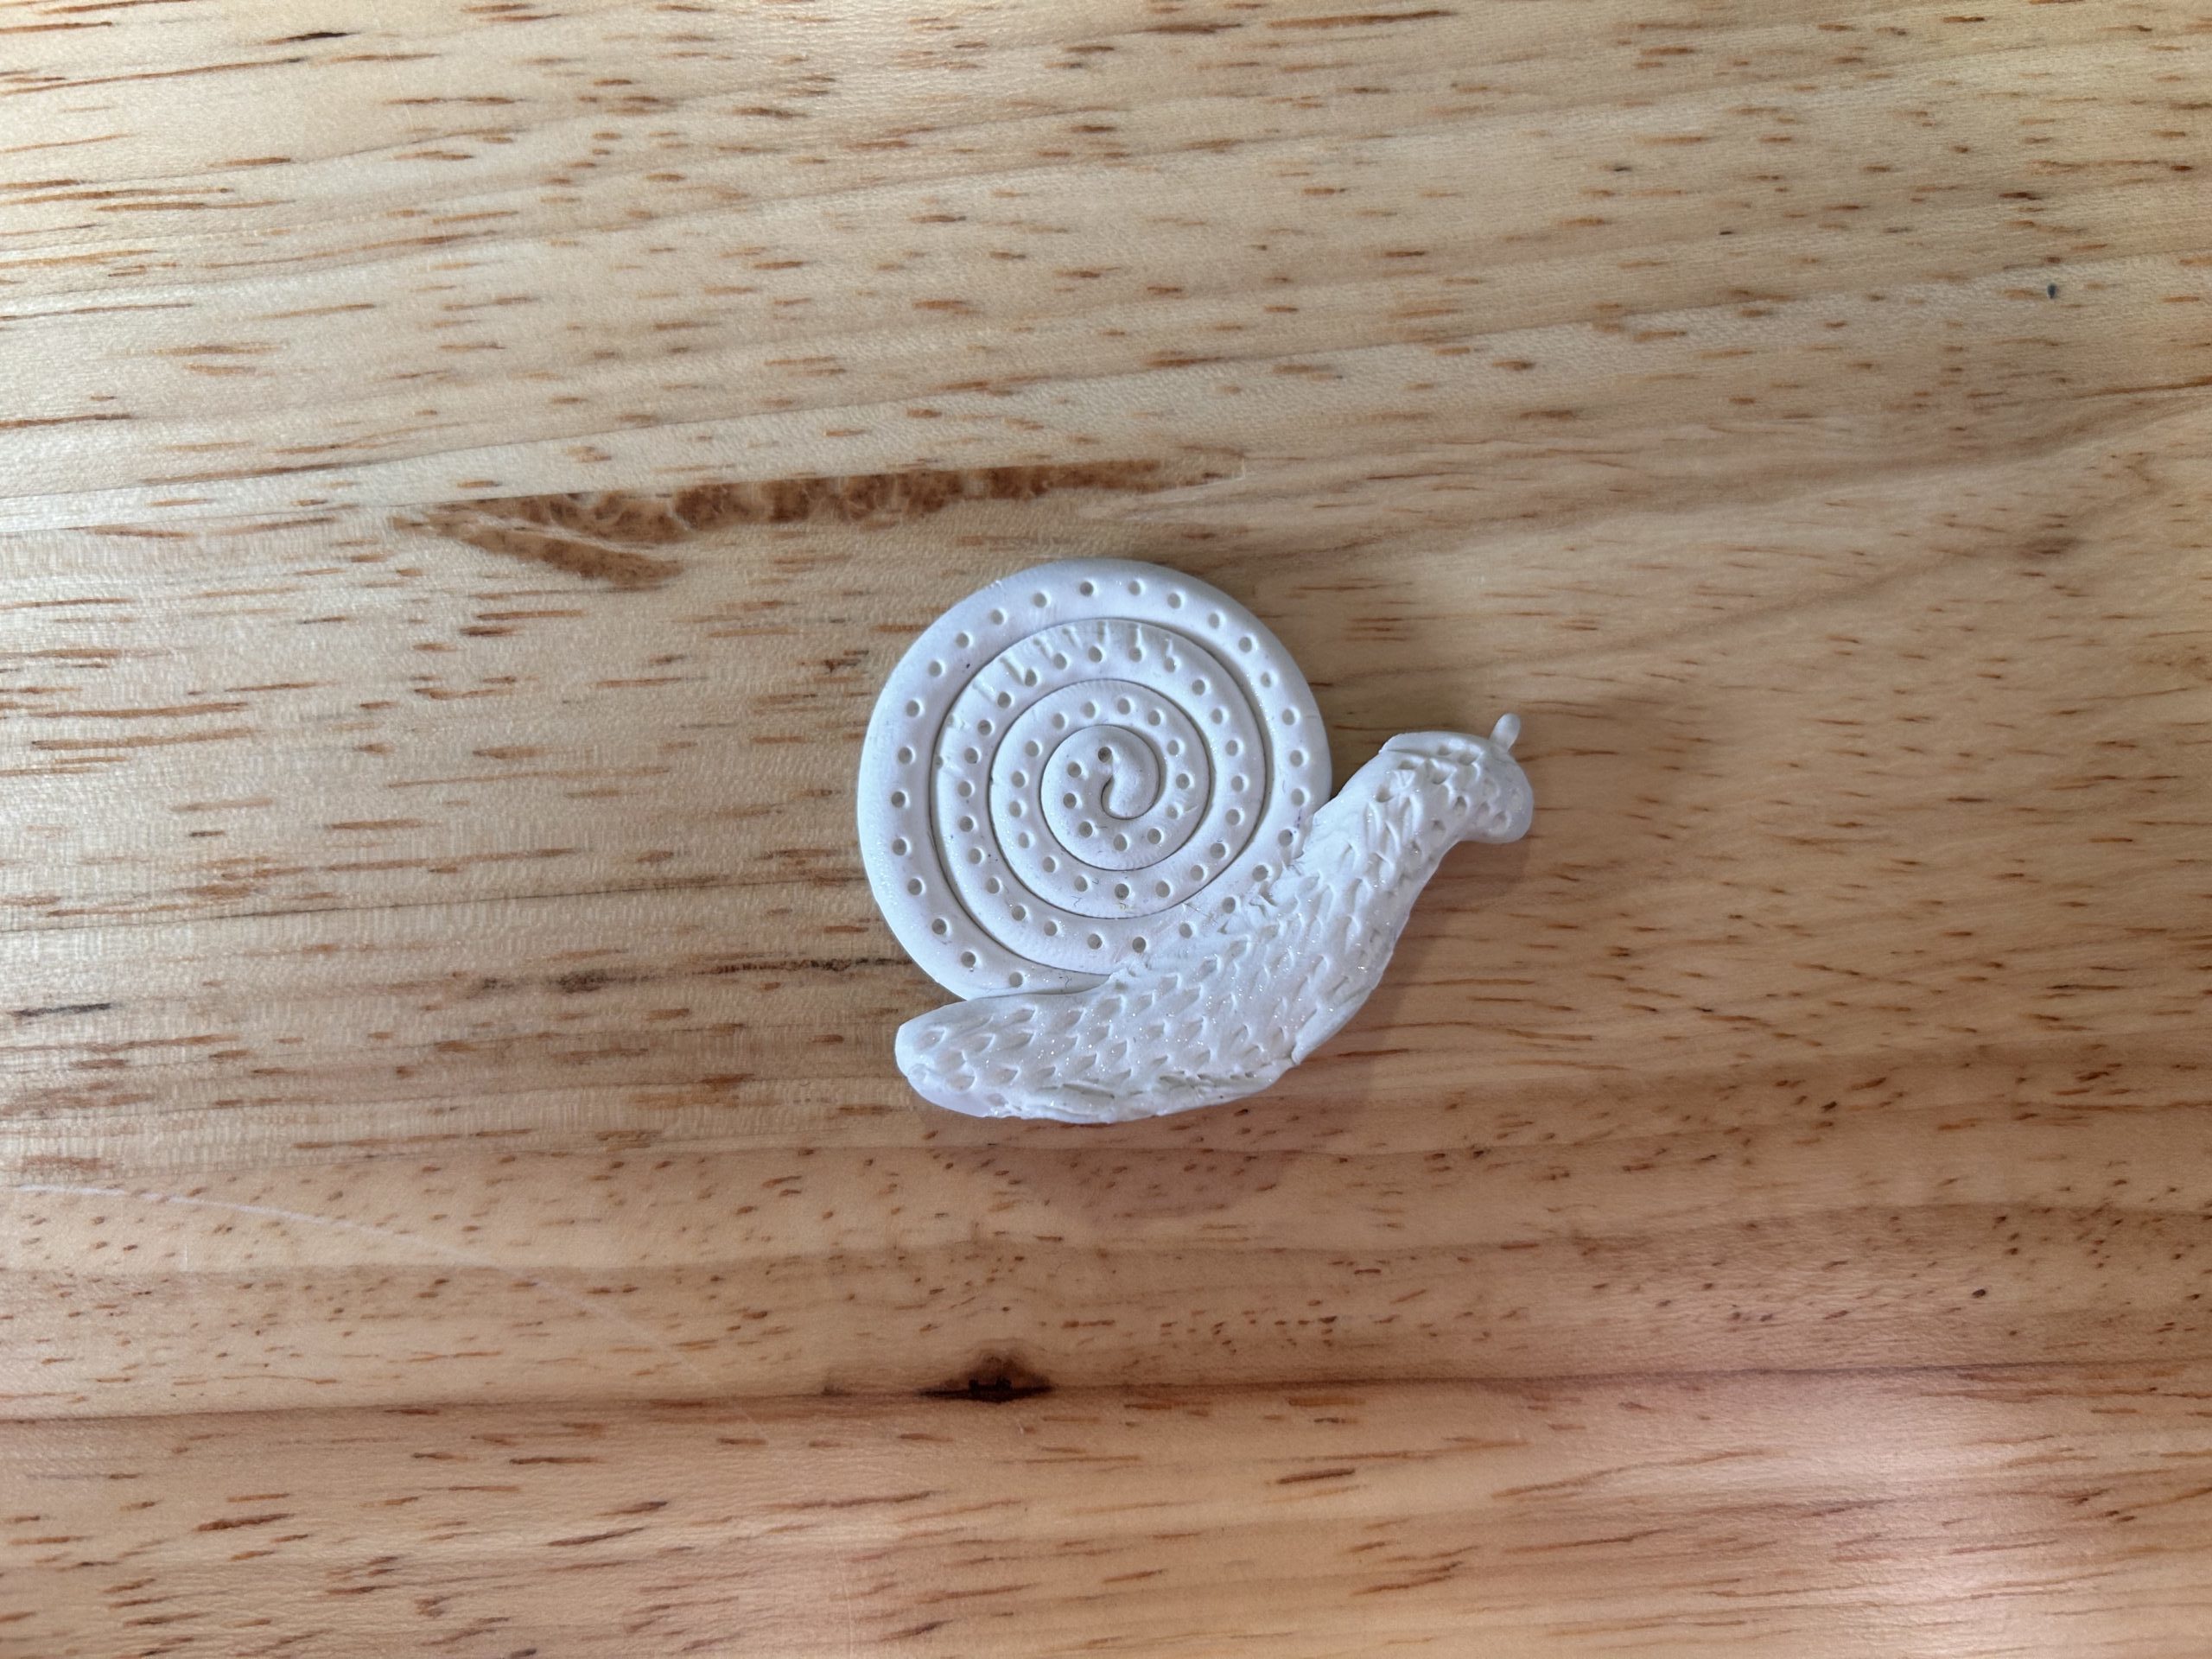 A plaster-cast snail sits on a table